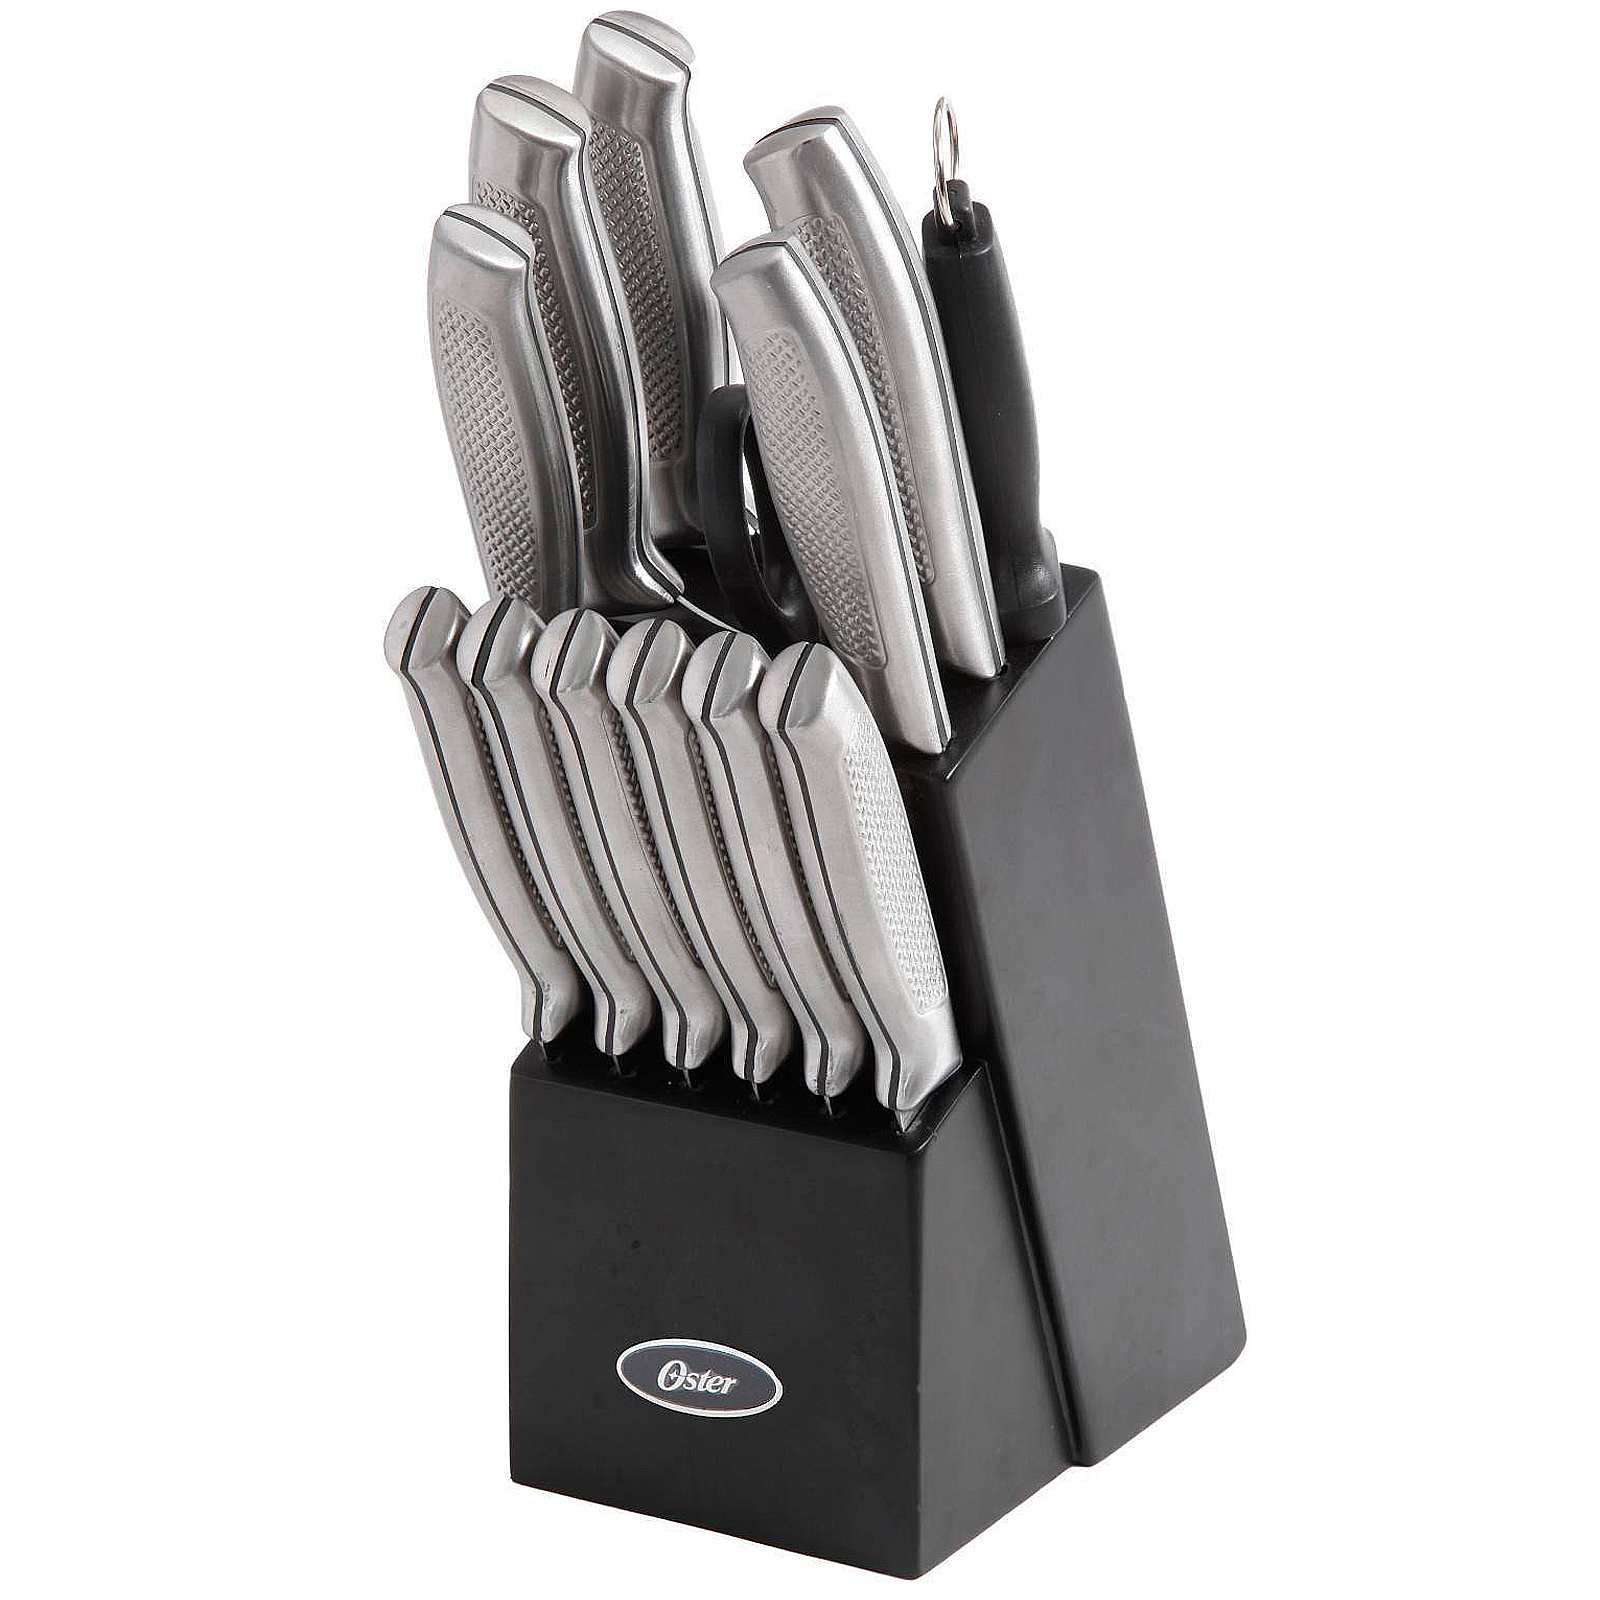 Oster Edgefield 14 pc Cutlery Set - Stainless Steel - 1.8/1.5 mm